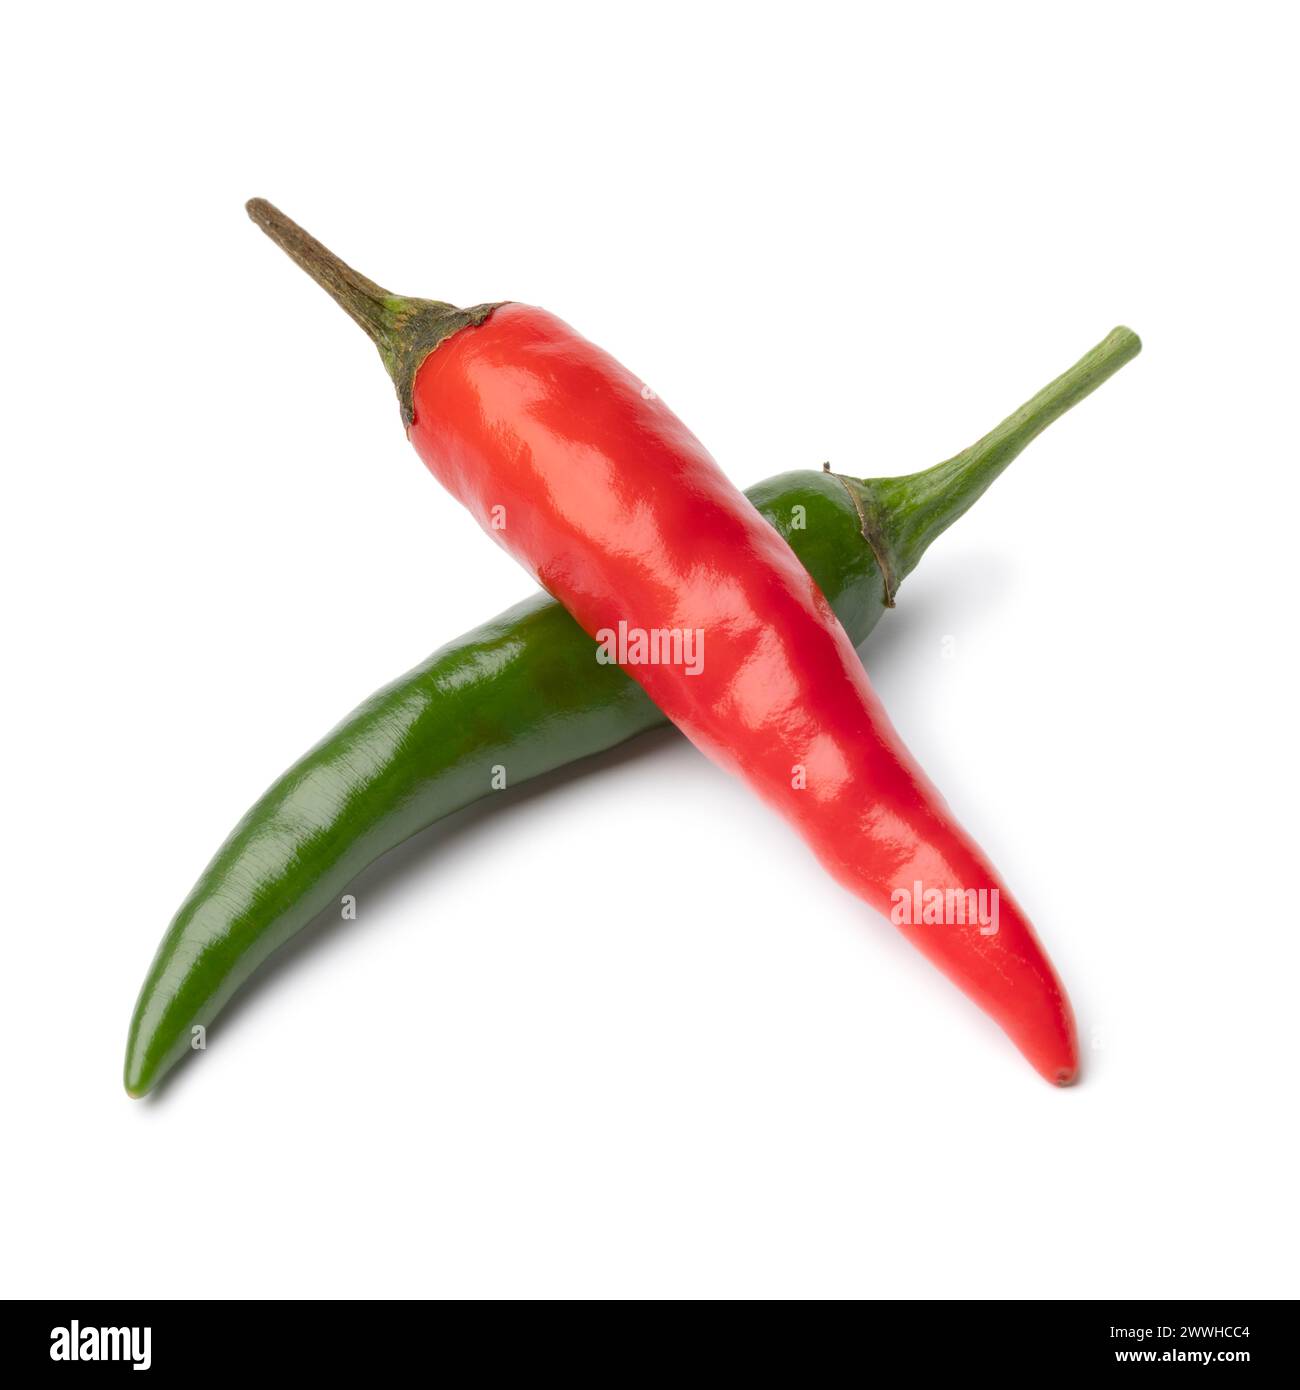 Whole fresh raw green and red rawit pepper close up isolated on white background Stock Photo